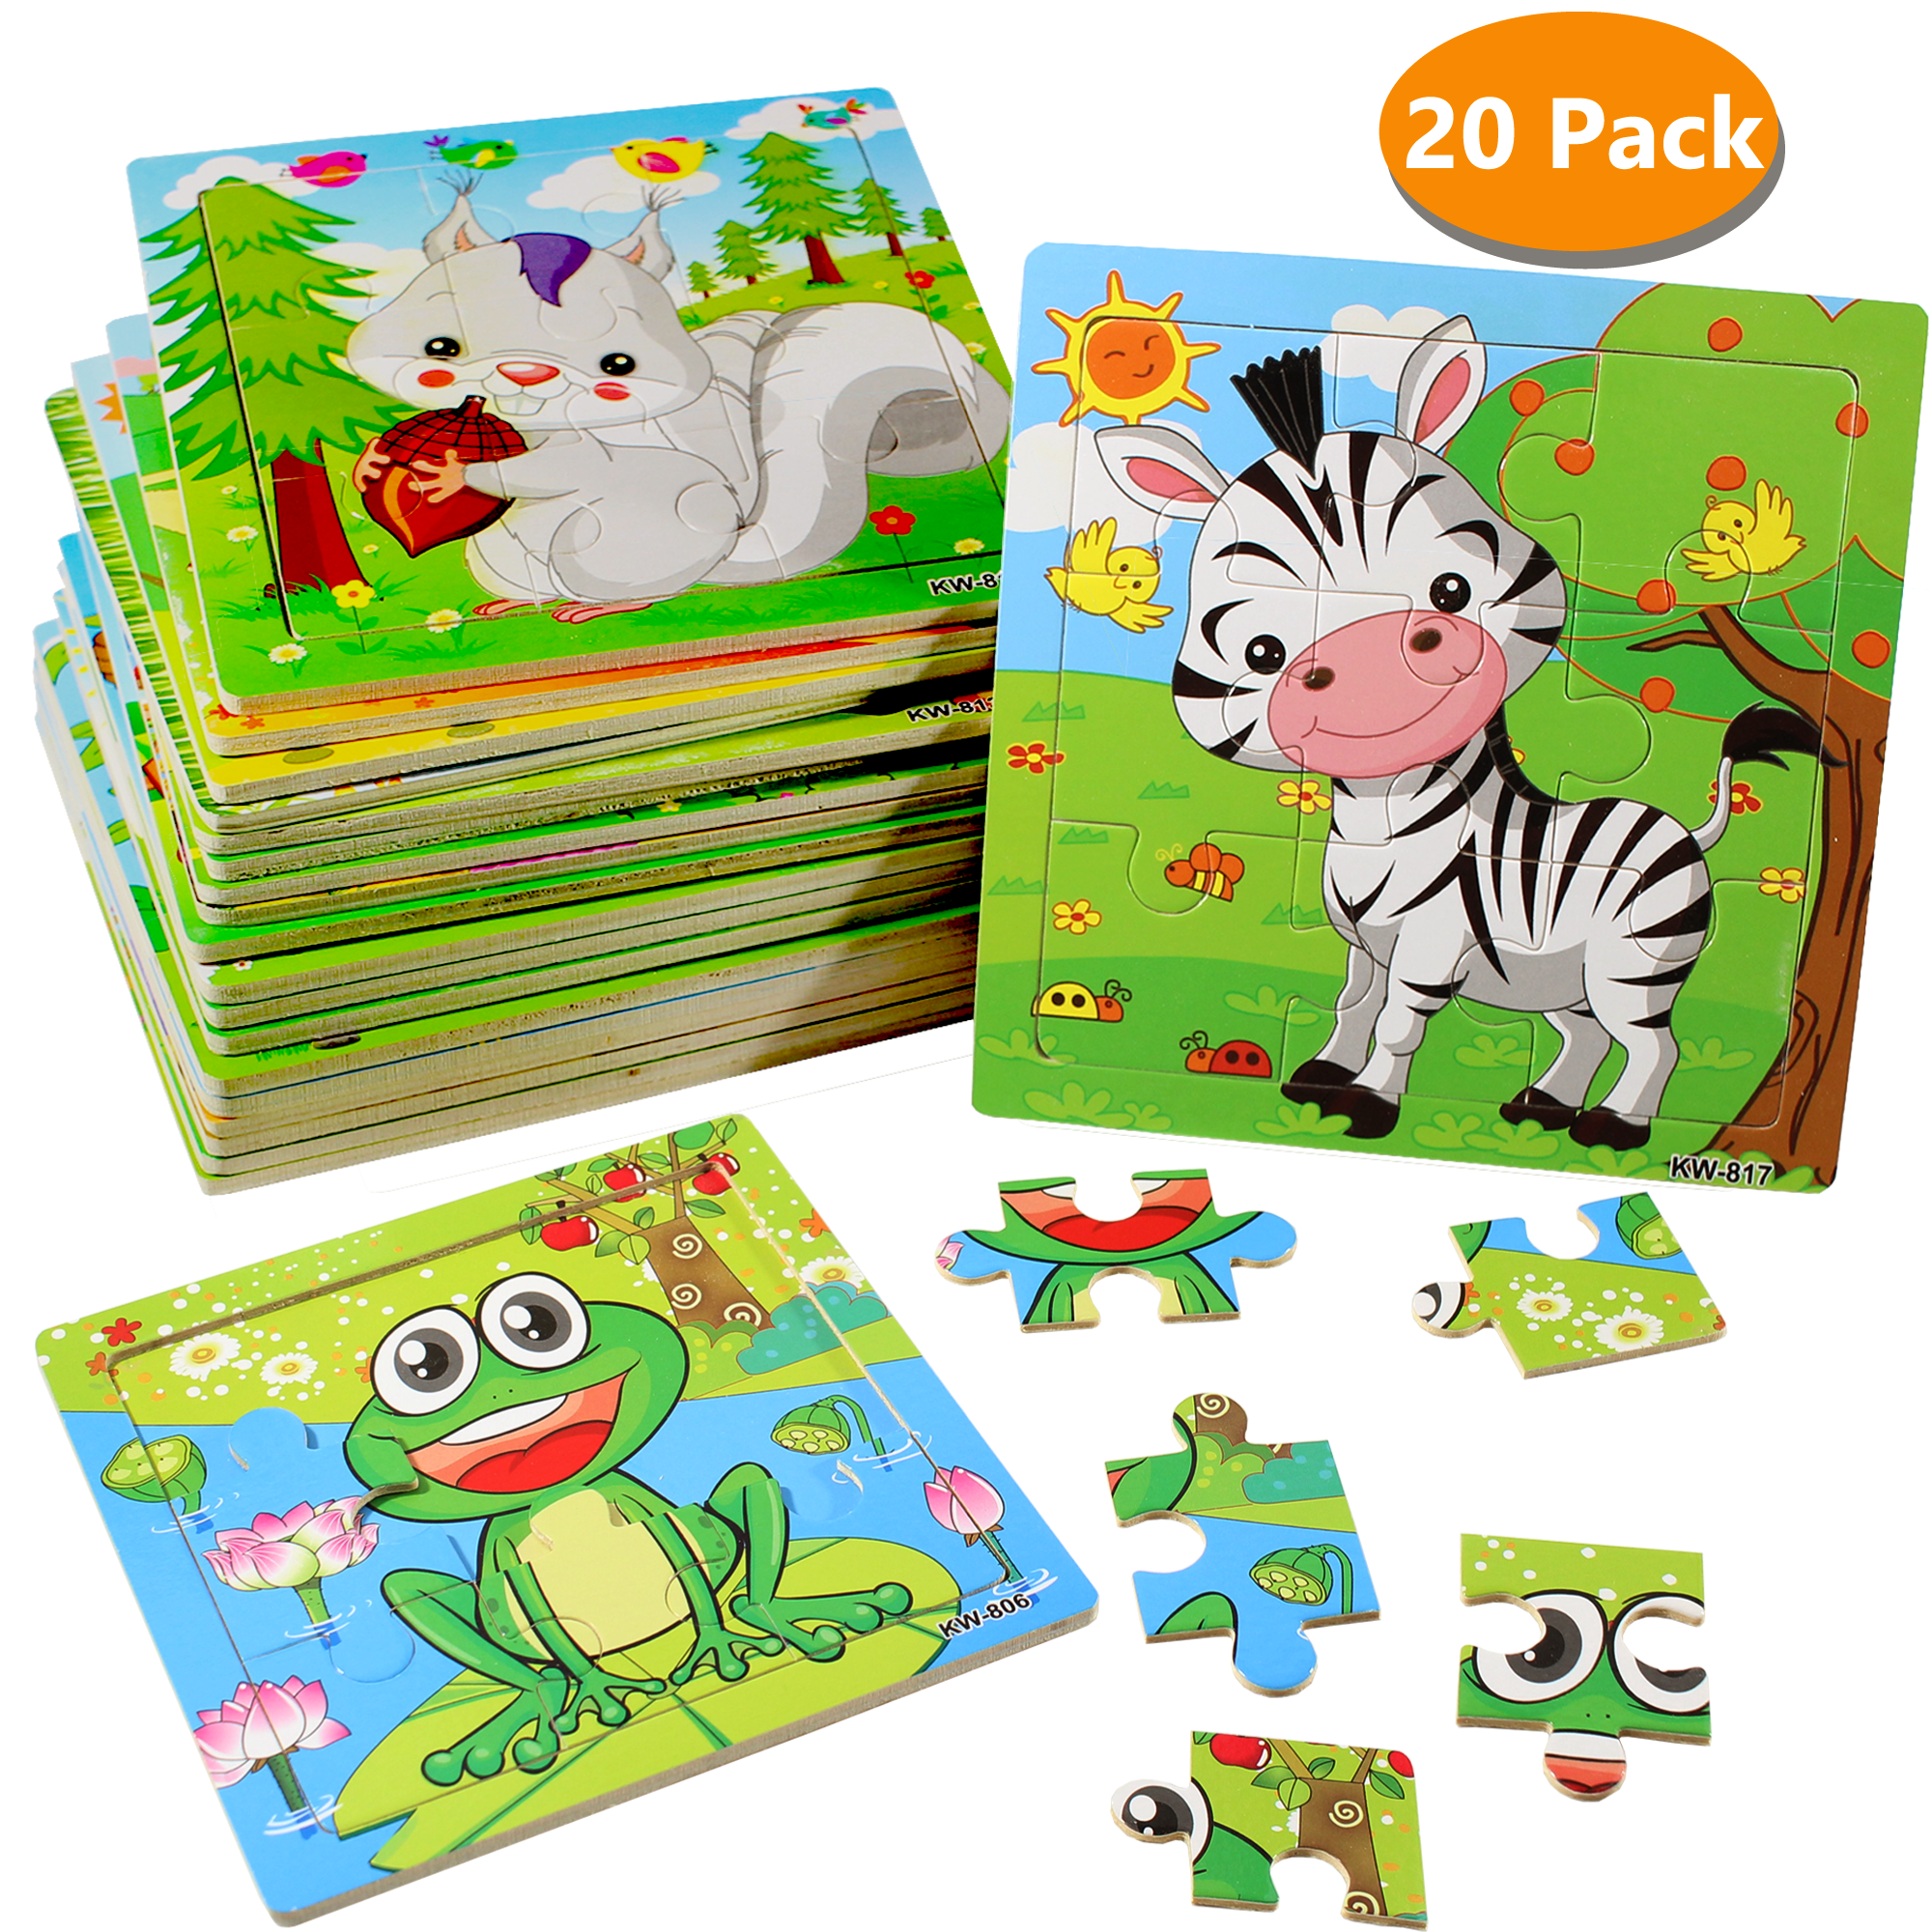 Wooden Jigsaw Puzzle for Preschool Kids Good Christmas Gift for Baby Toddler 